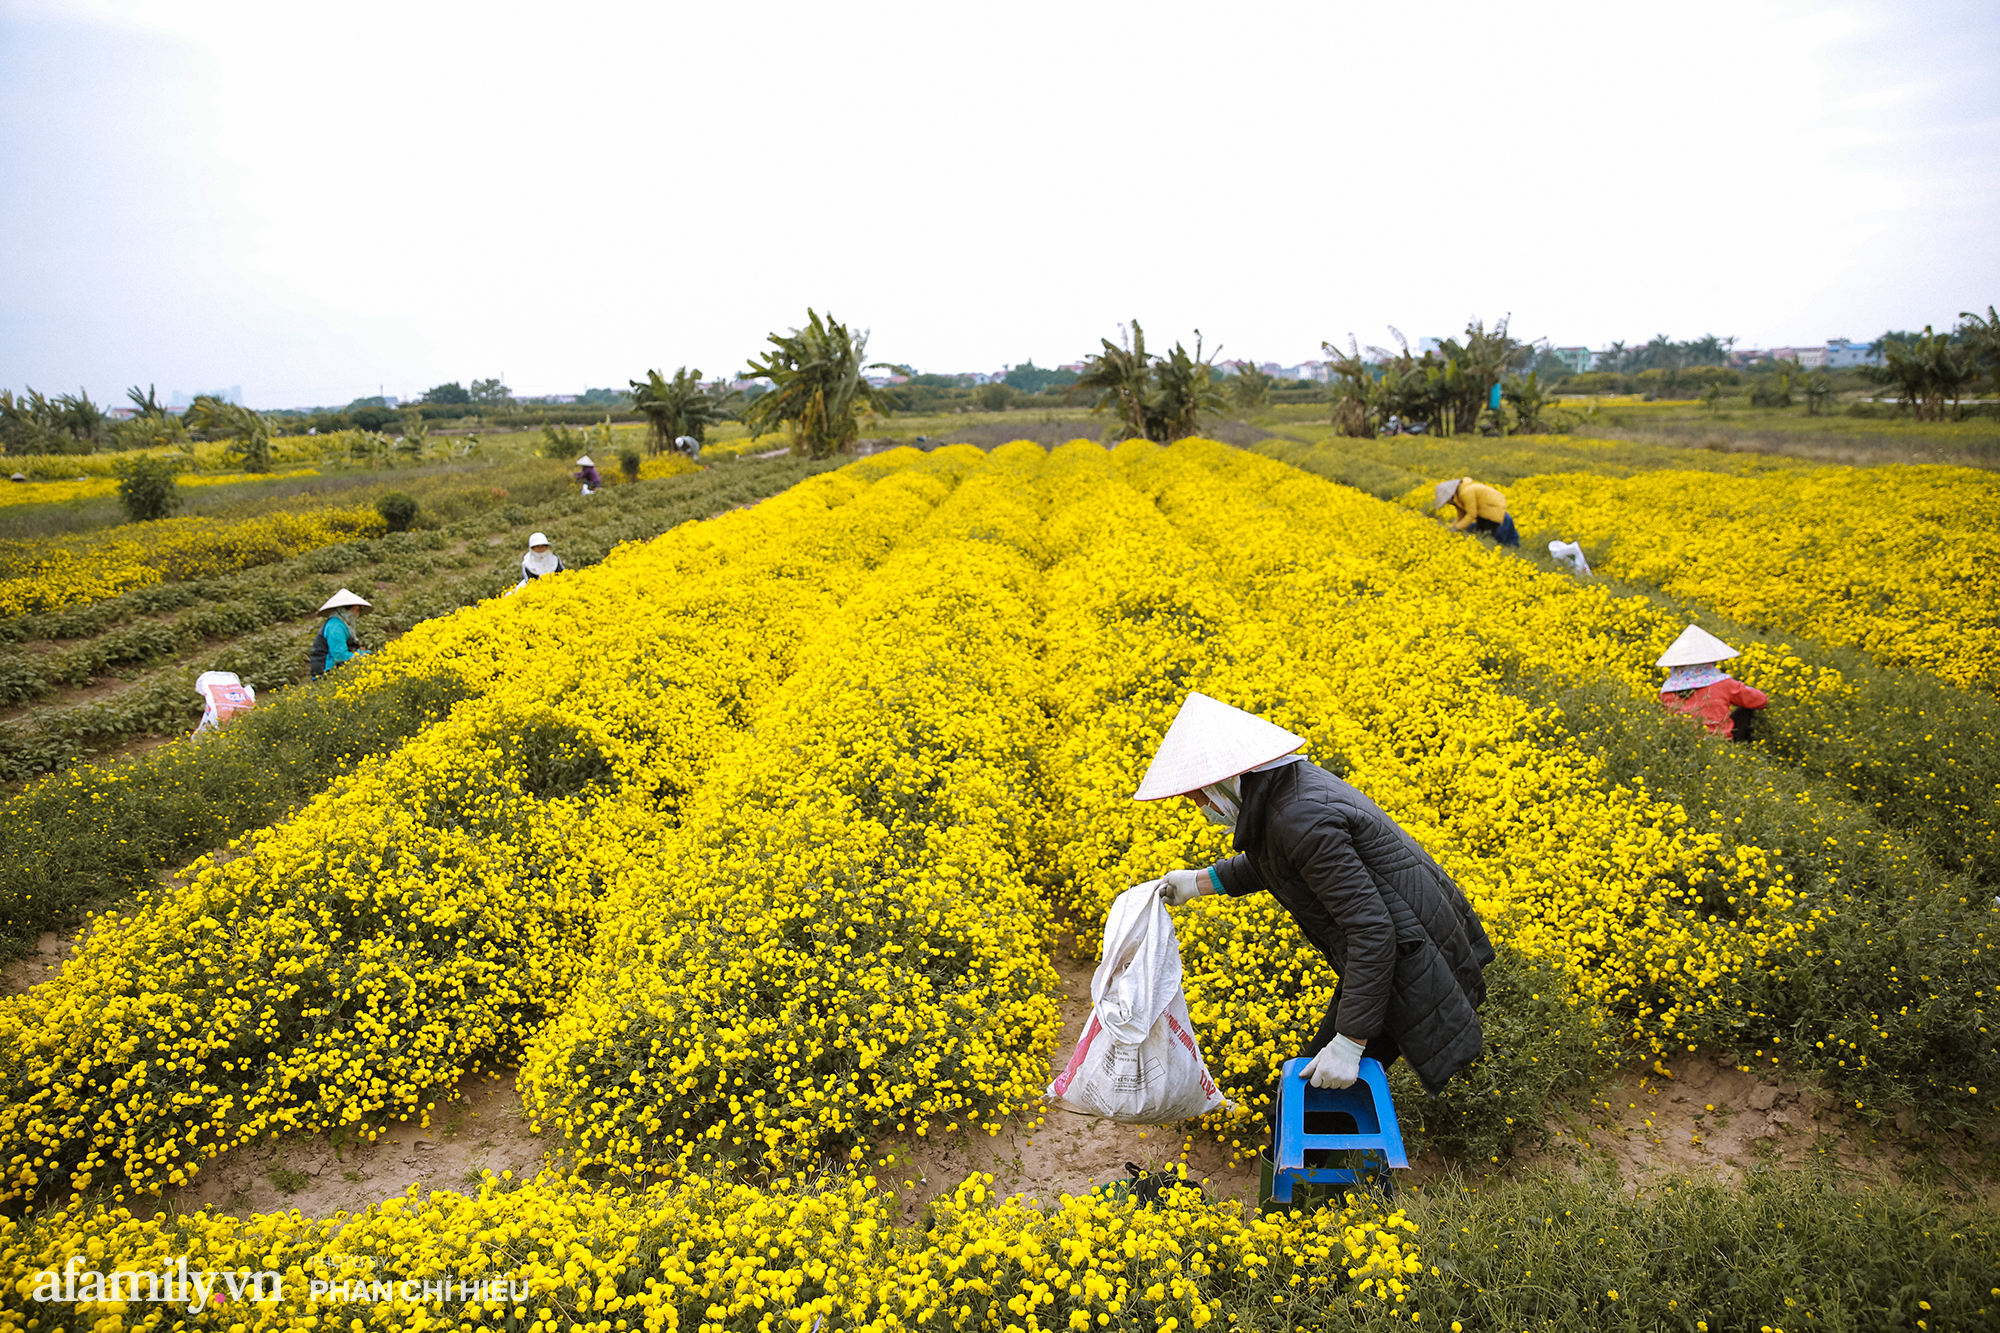 Visit a hundred-year village near Hanoi, possessing the "kingly" chrysanthemum fields  golden, making people everywhere pouring in to take pictures - Photo 3.